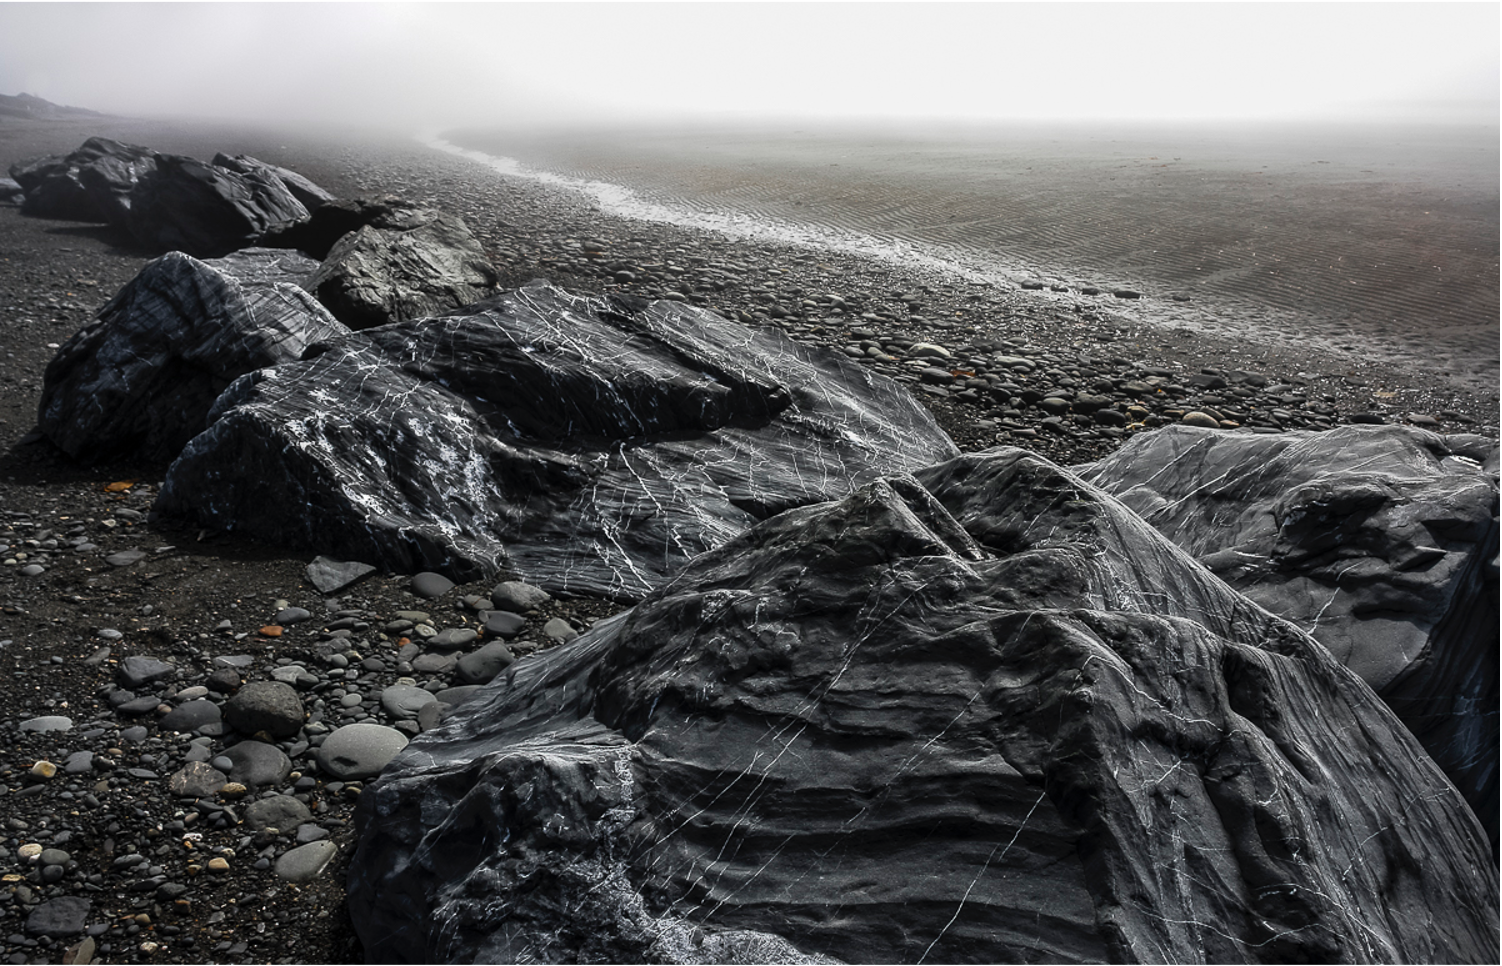 Large rocks in the sand and pebbles at a beach on a gray day with fog